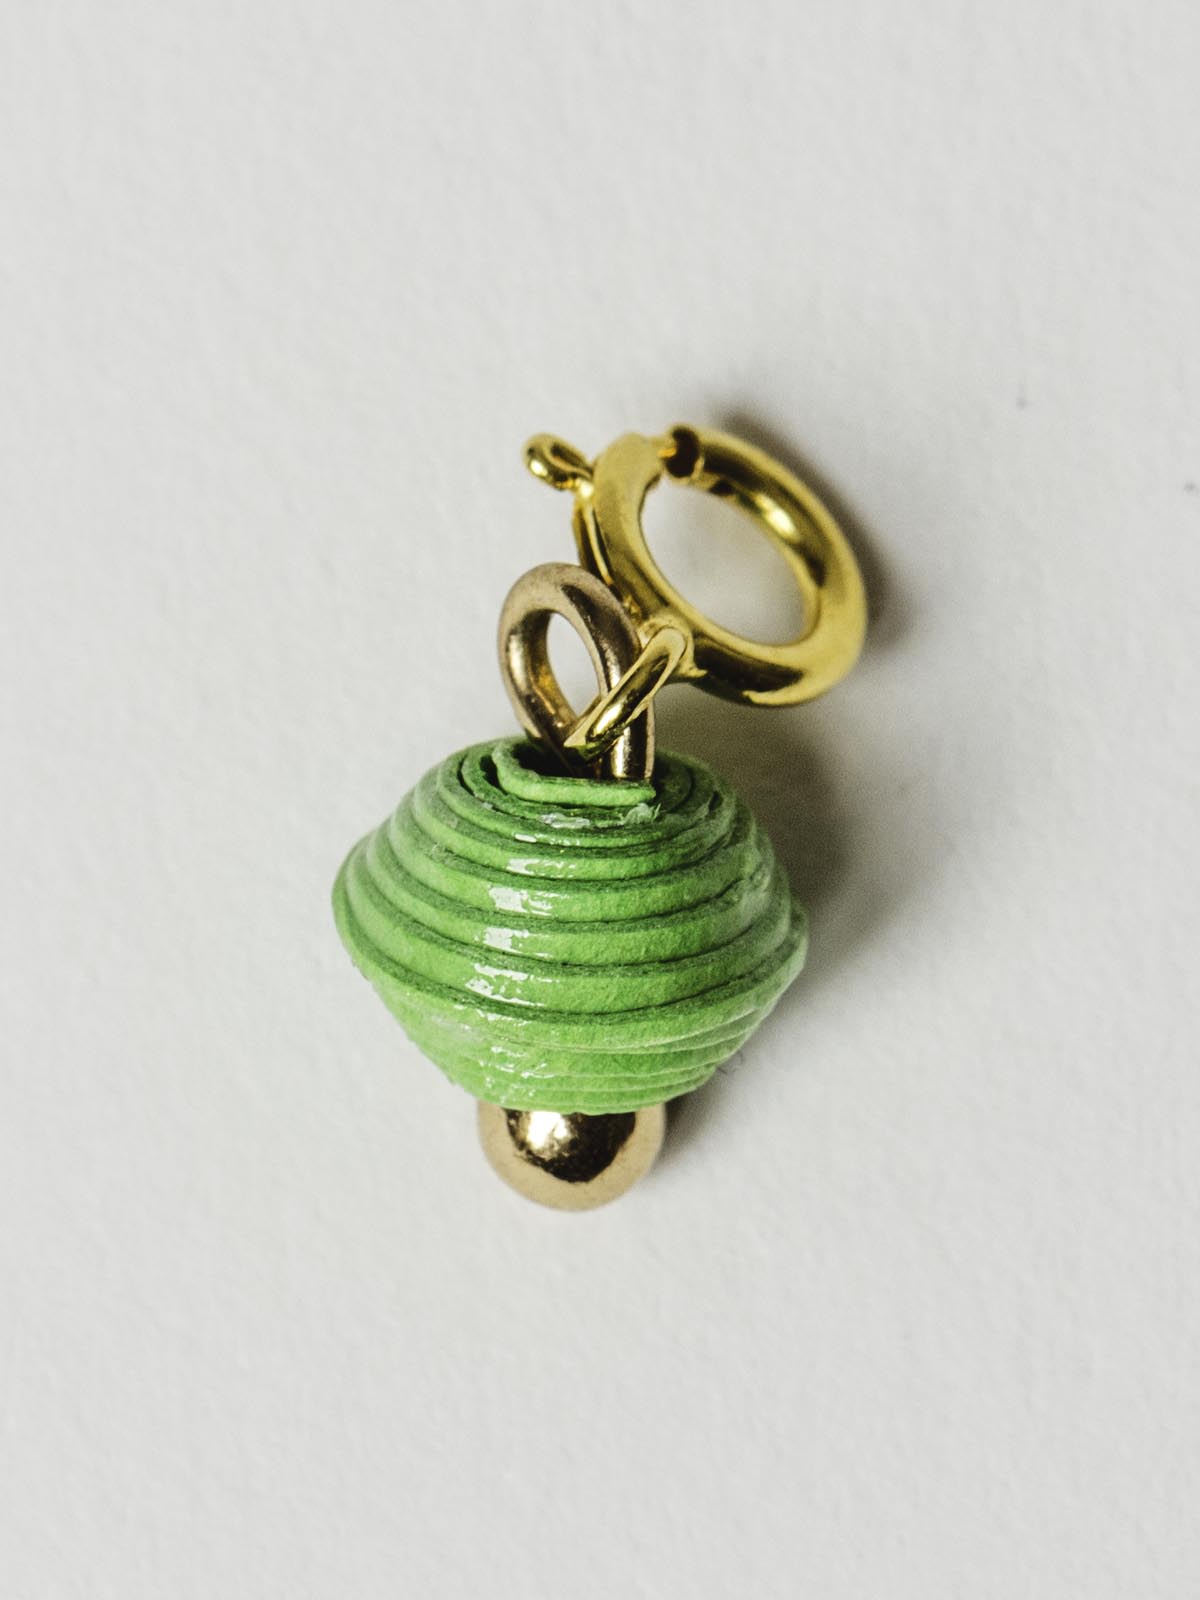 Bright green bead charm on gold clasp. 